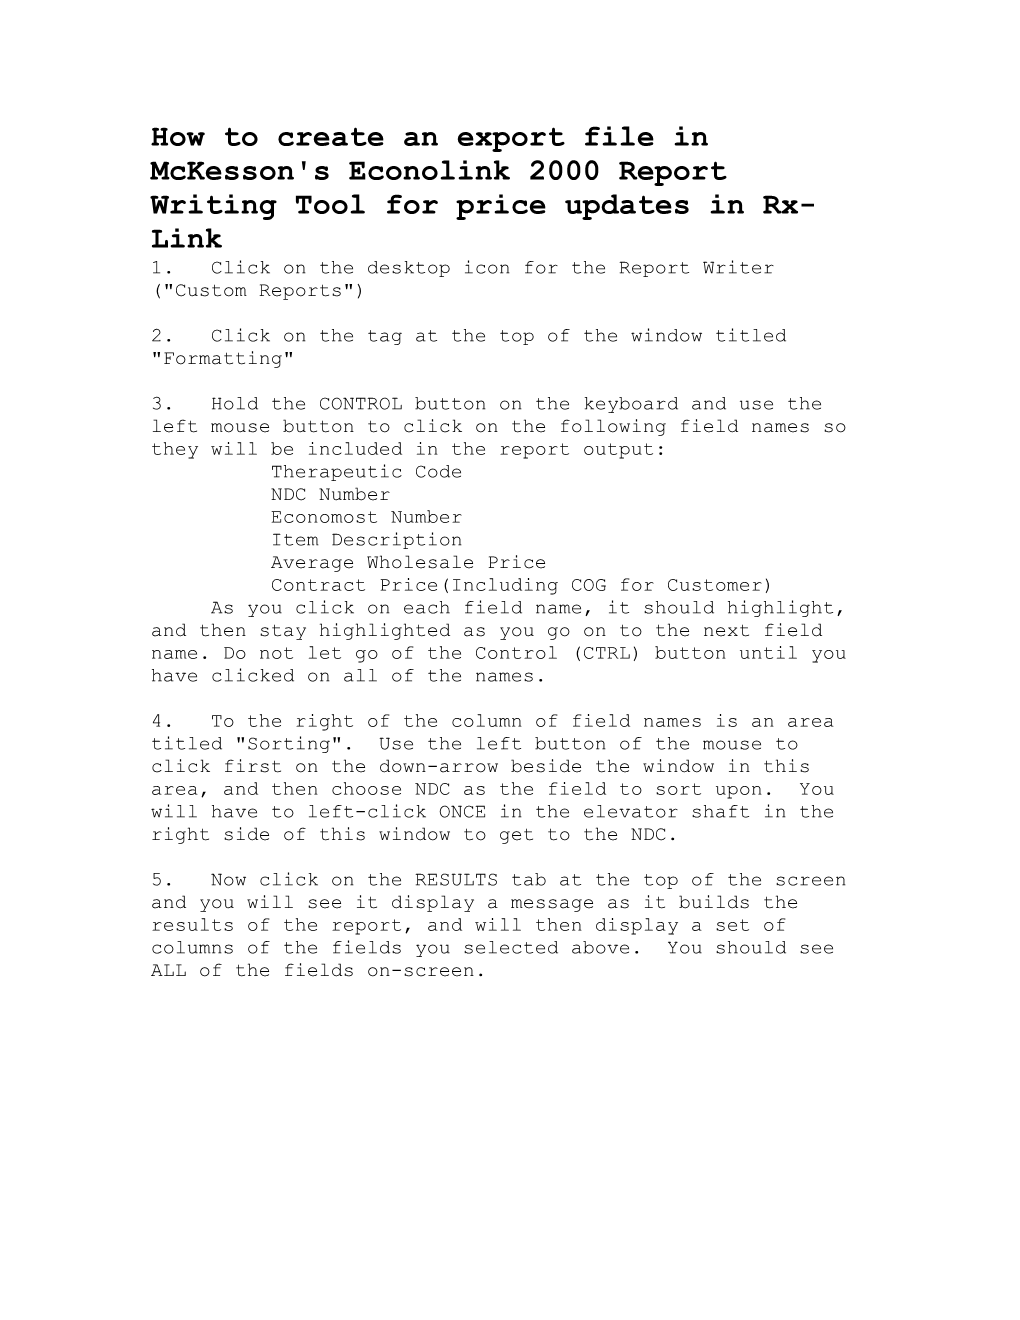 How to Create an Export File in Mckesson's Econolink 2000 Report Writing Tool for Price